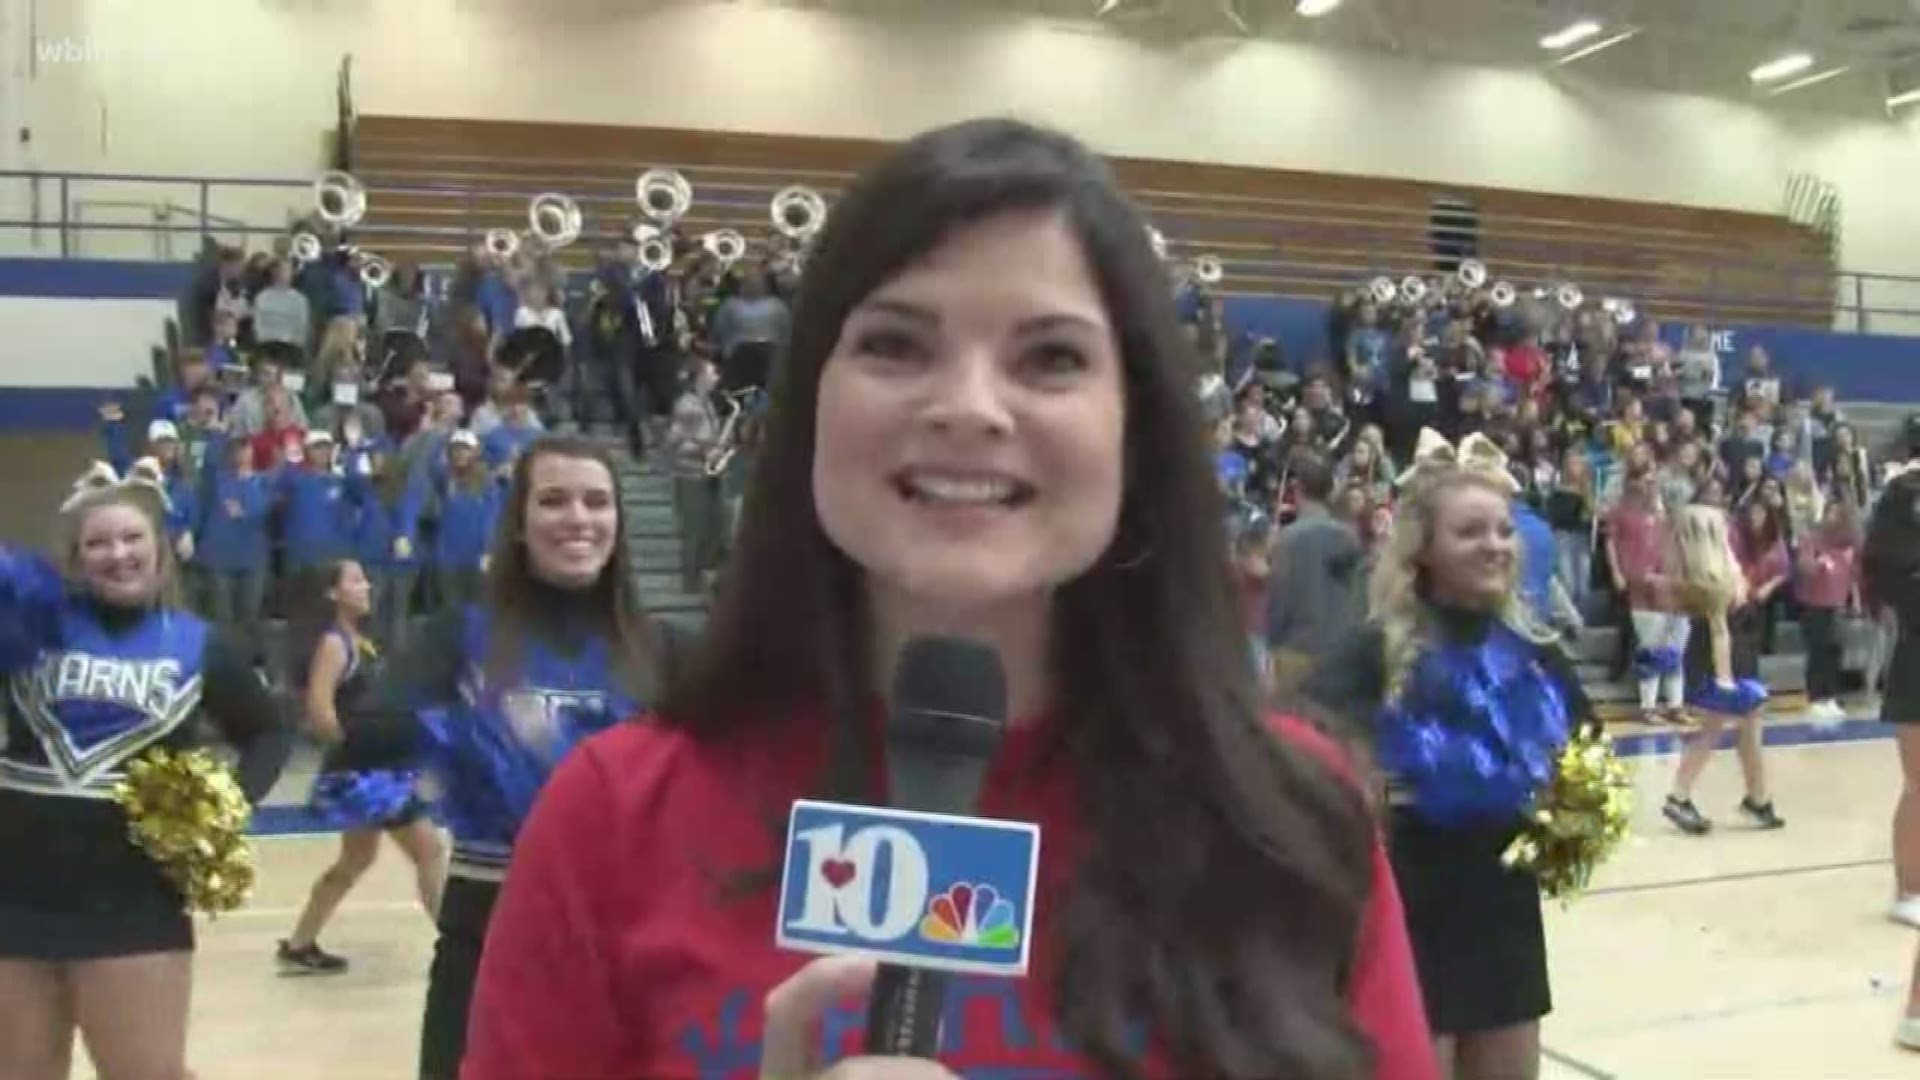 10News reporter Heather Waliga joins us from her alma mater: Karns High School. The beavers are getting ready to take on Heritage High School at 7:30 p.m.